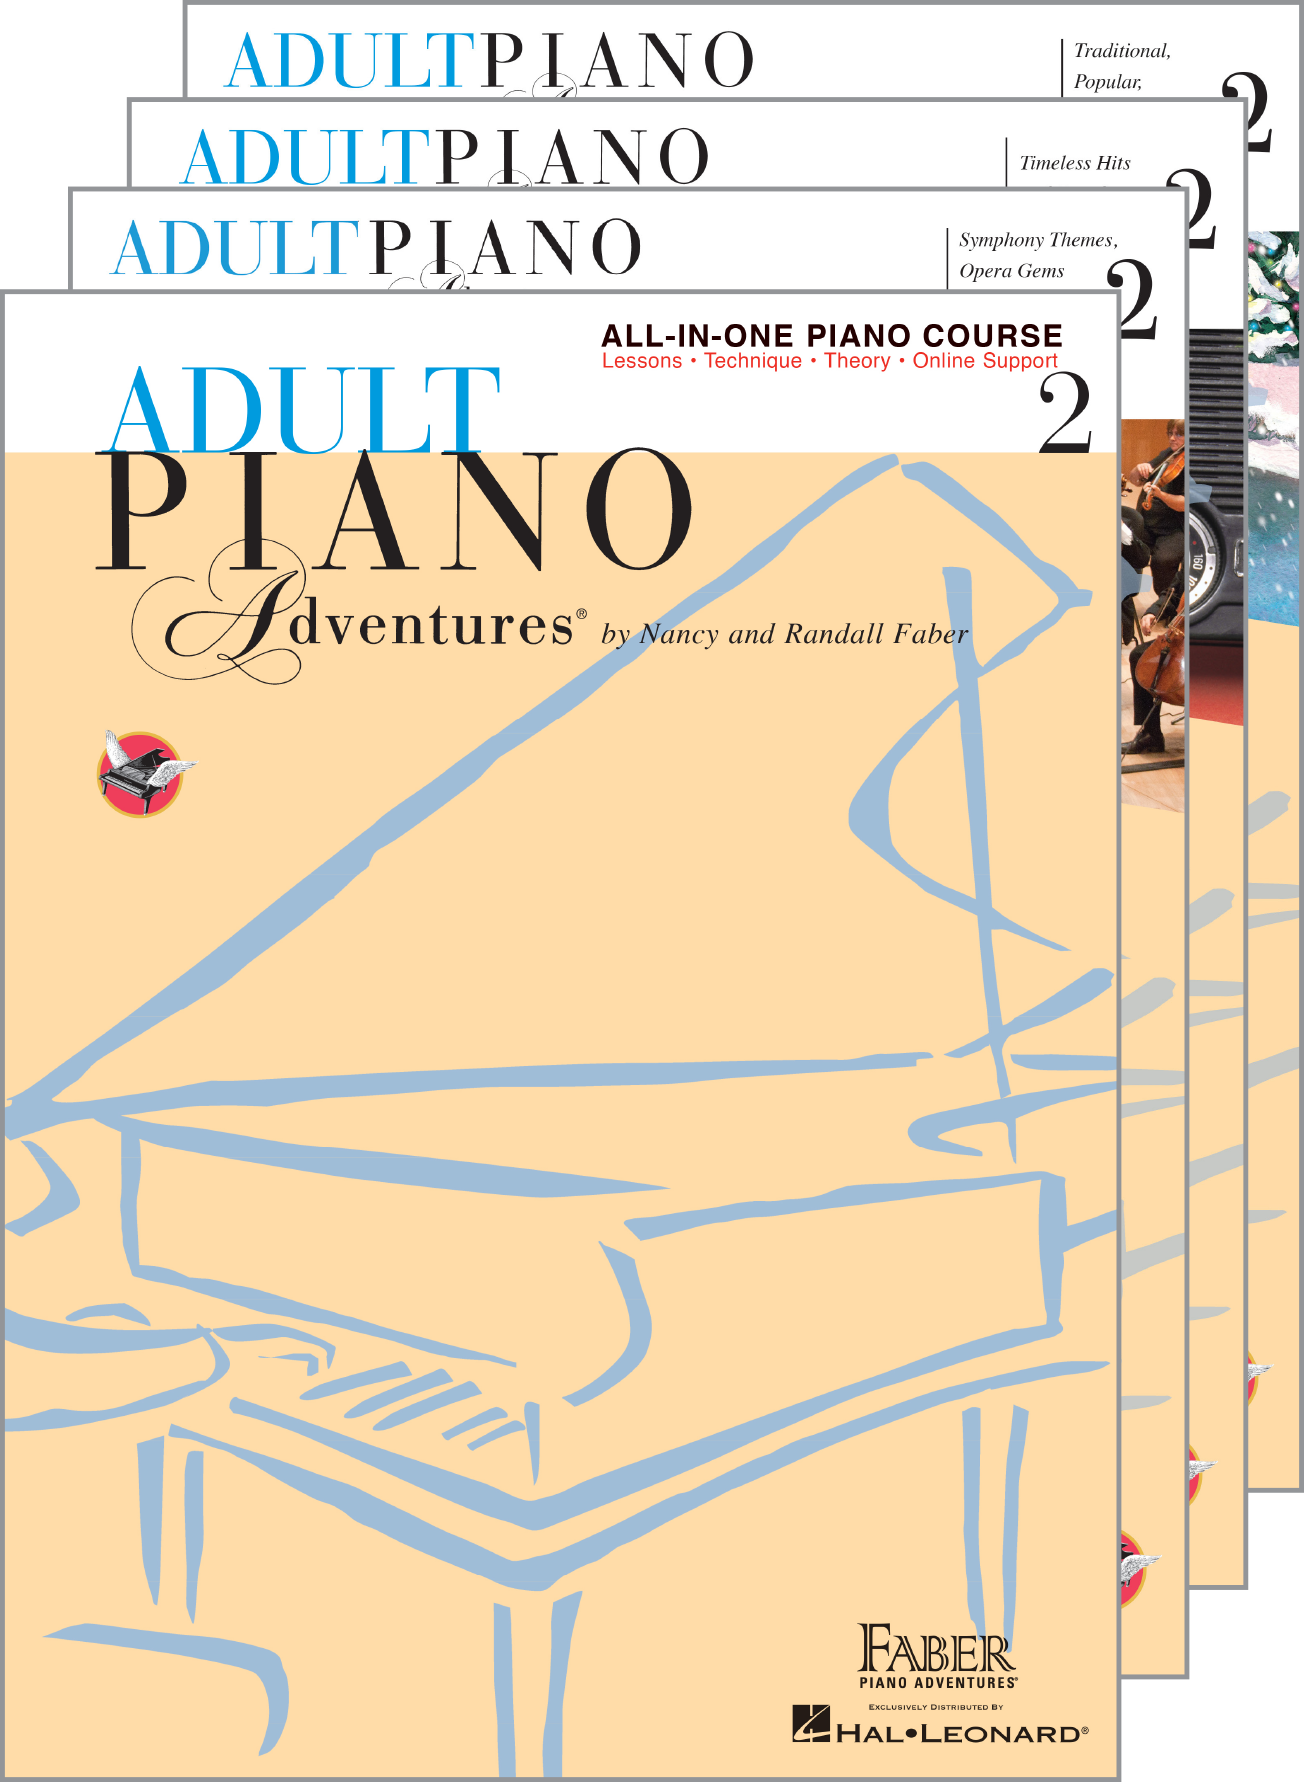 Adult Piano Adventures All-in-One Course Book 1 - Faber Piano Adventures